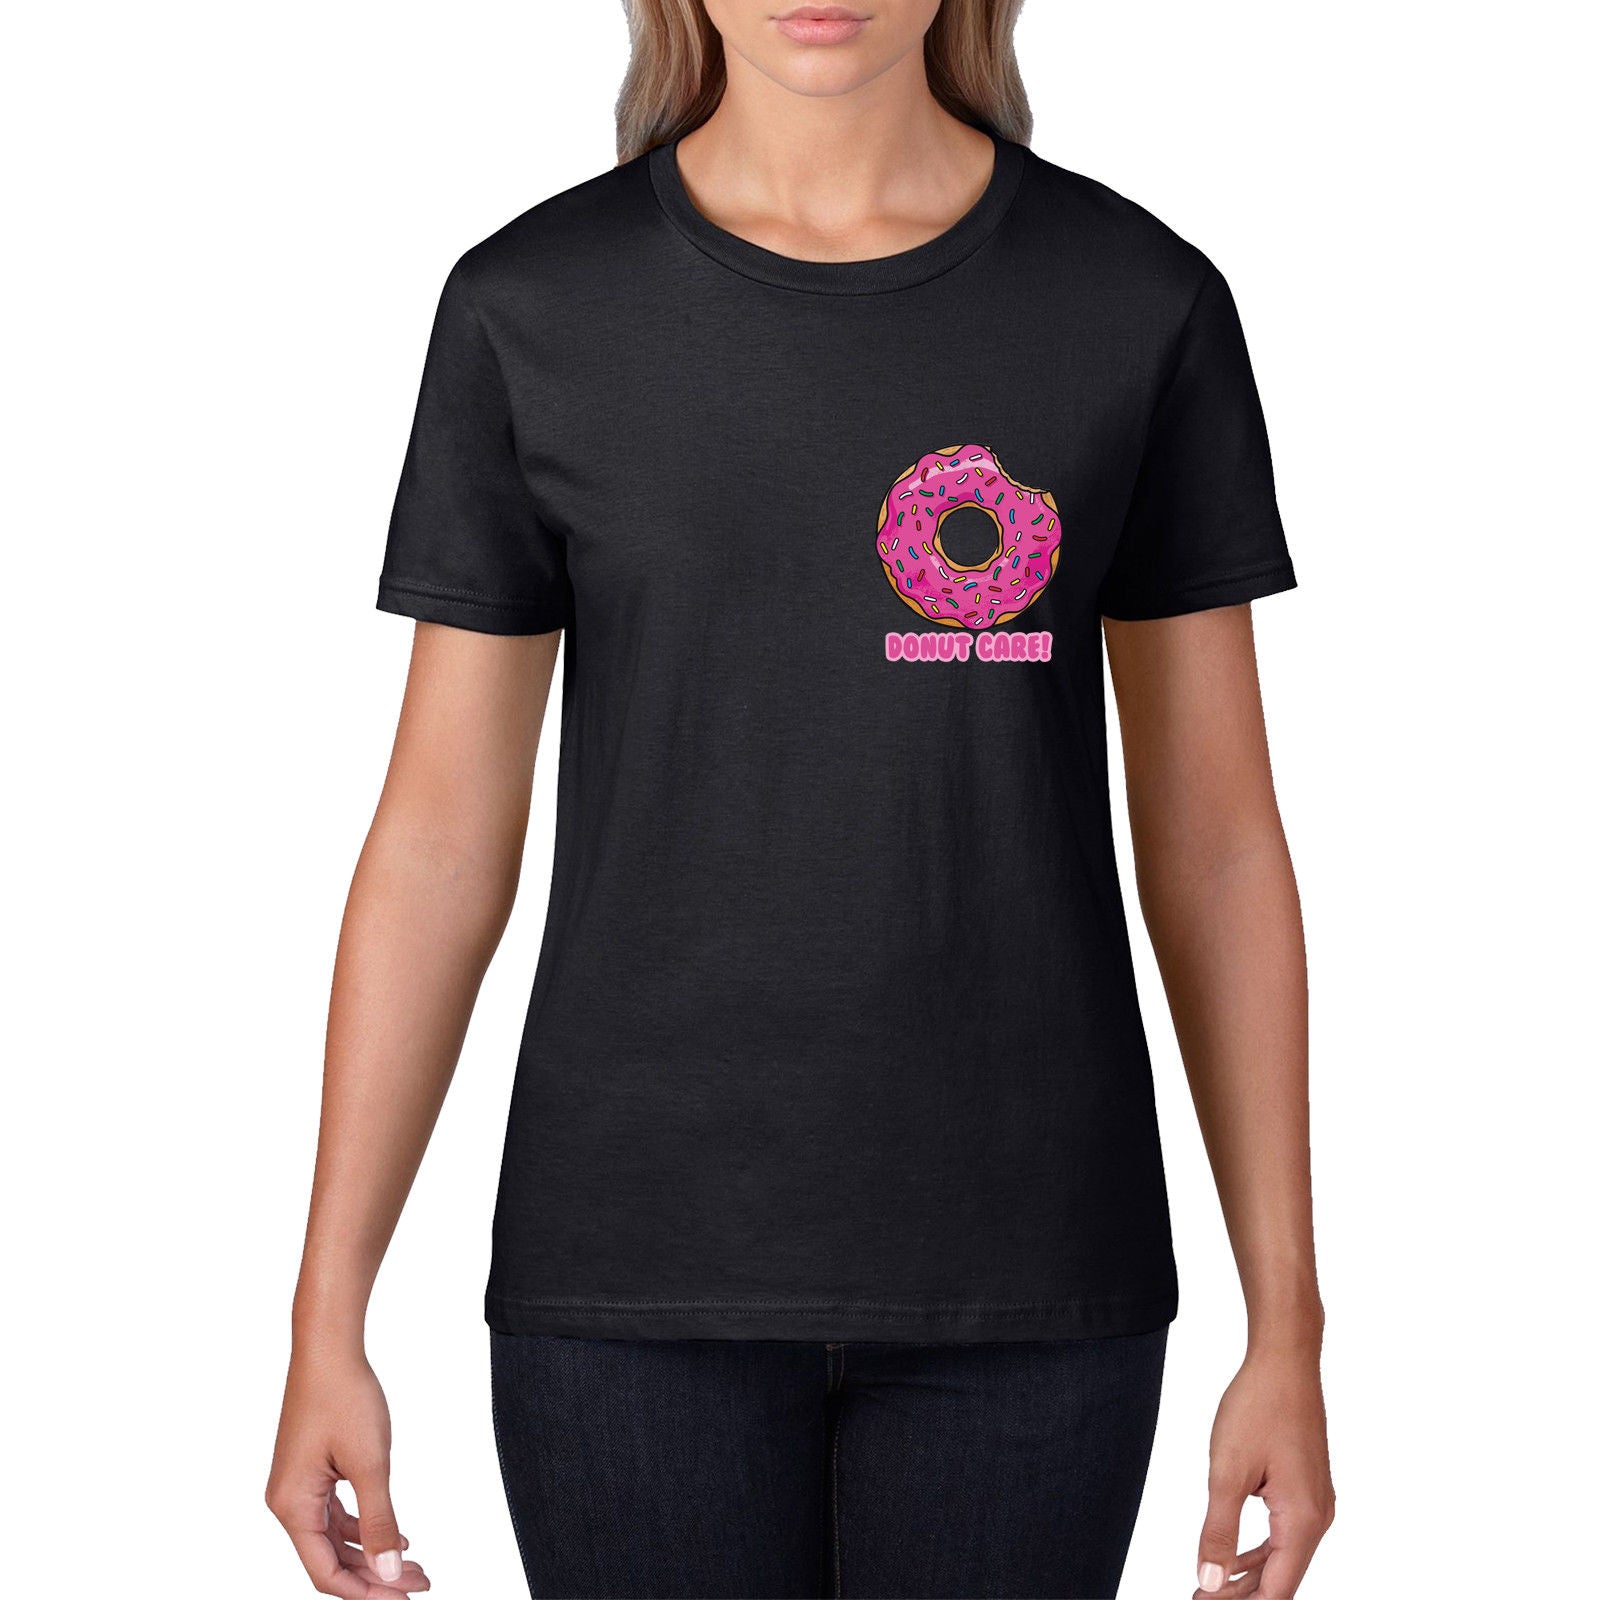 Harmoni for ikke at nævne Styring Donut Care Funny Girls T Shirt Doughnut Lover Rude Geek T-Shirts Womens Top  858 - The Clothing Shed